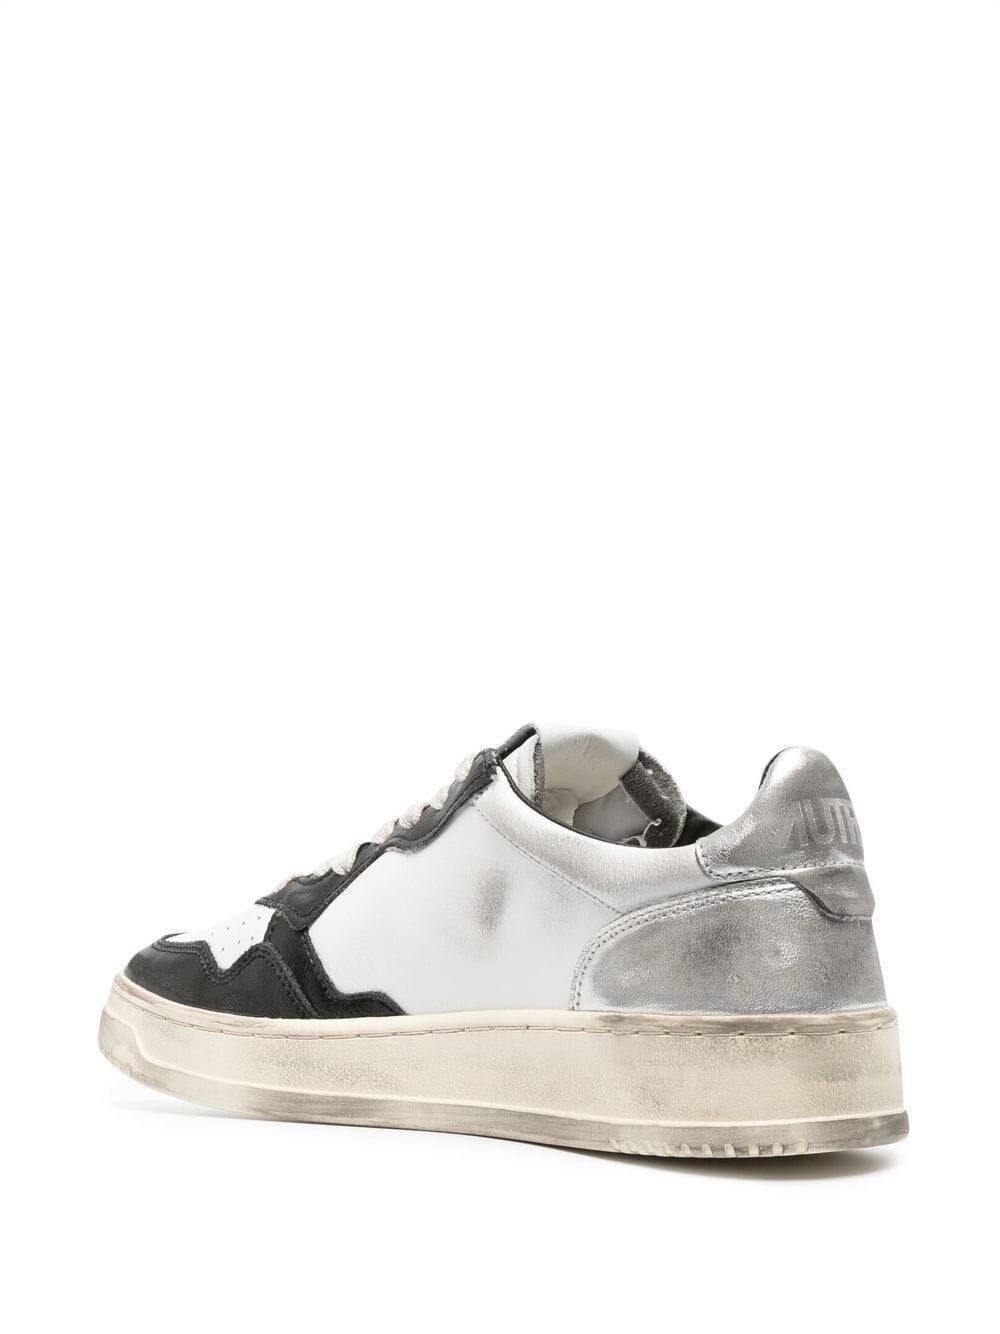 Shop Autry Sup Vint Low Man Sneakers In White